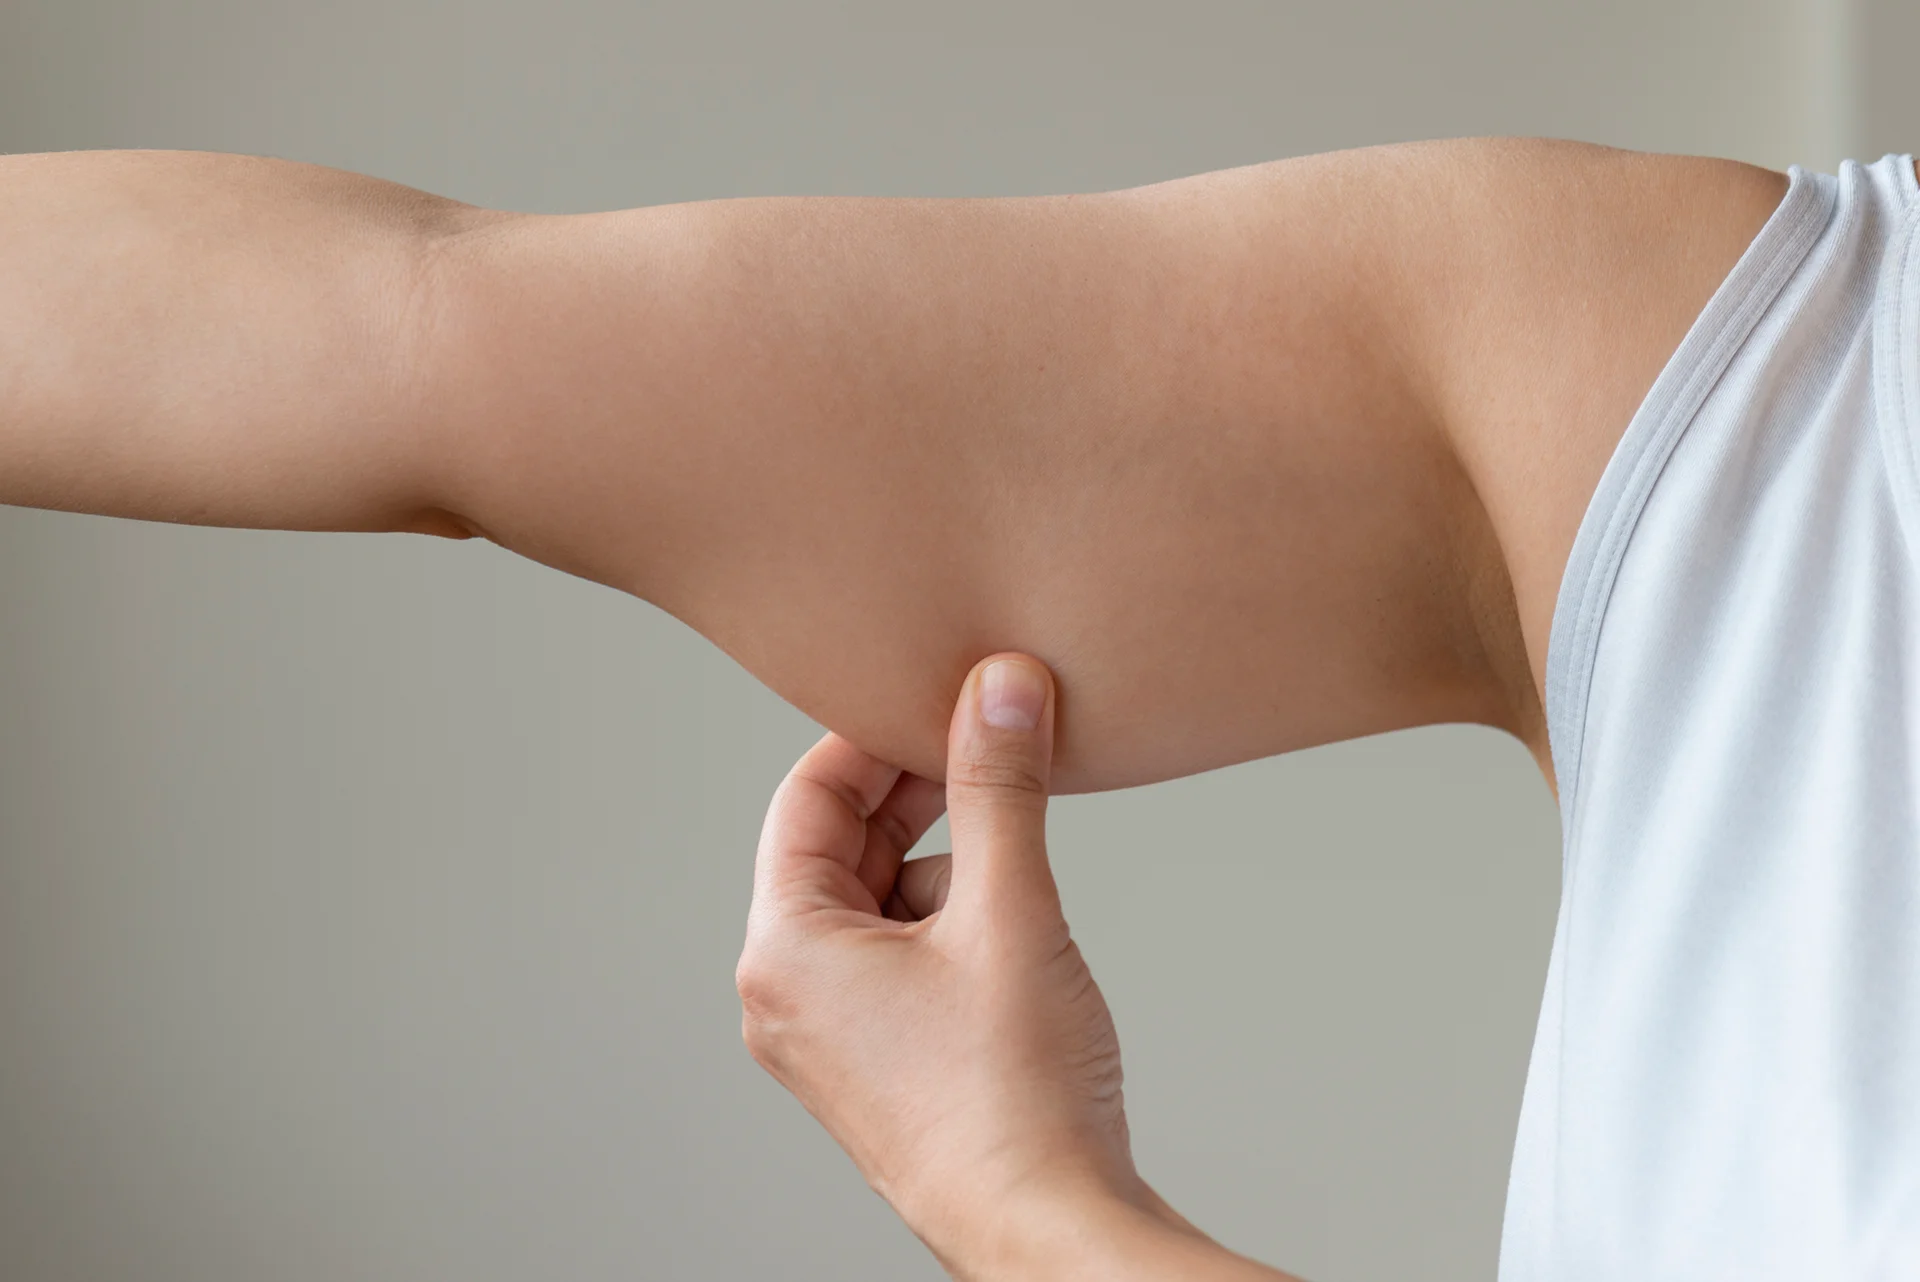 A person pinching the skin on their upper arm, focusing on body fat measurement during arm liposuction recovery.